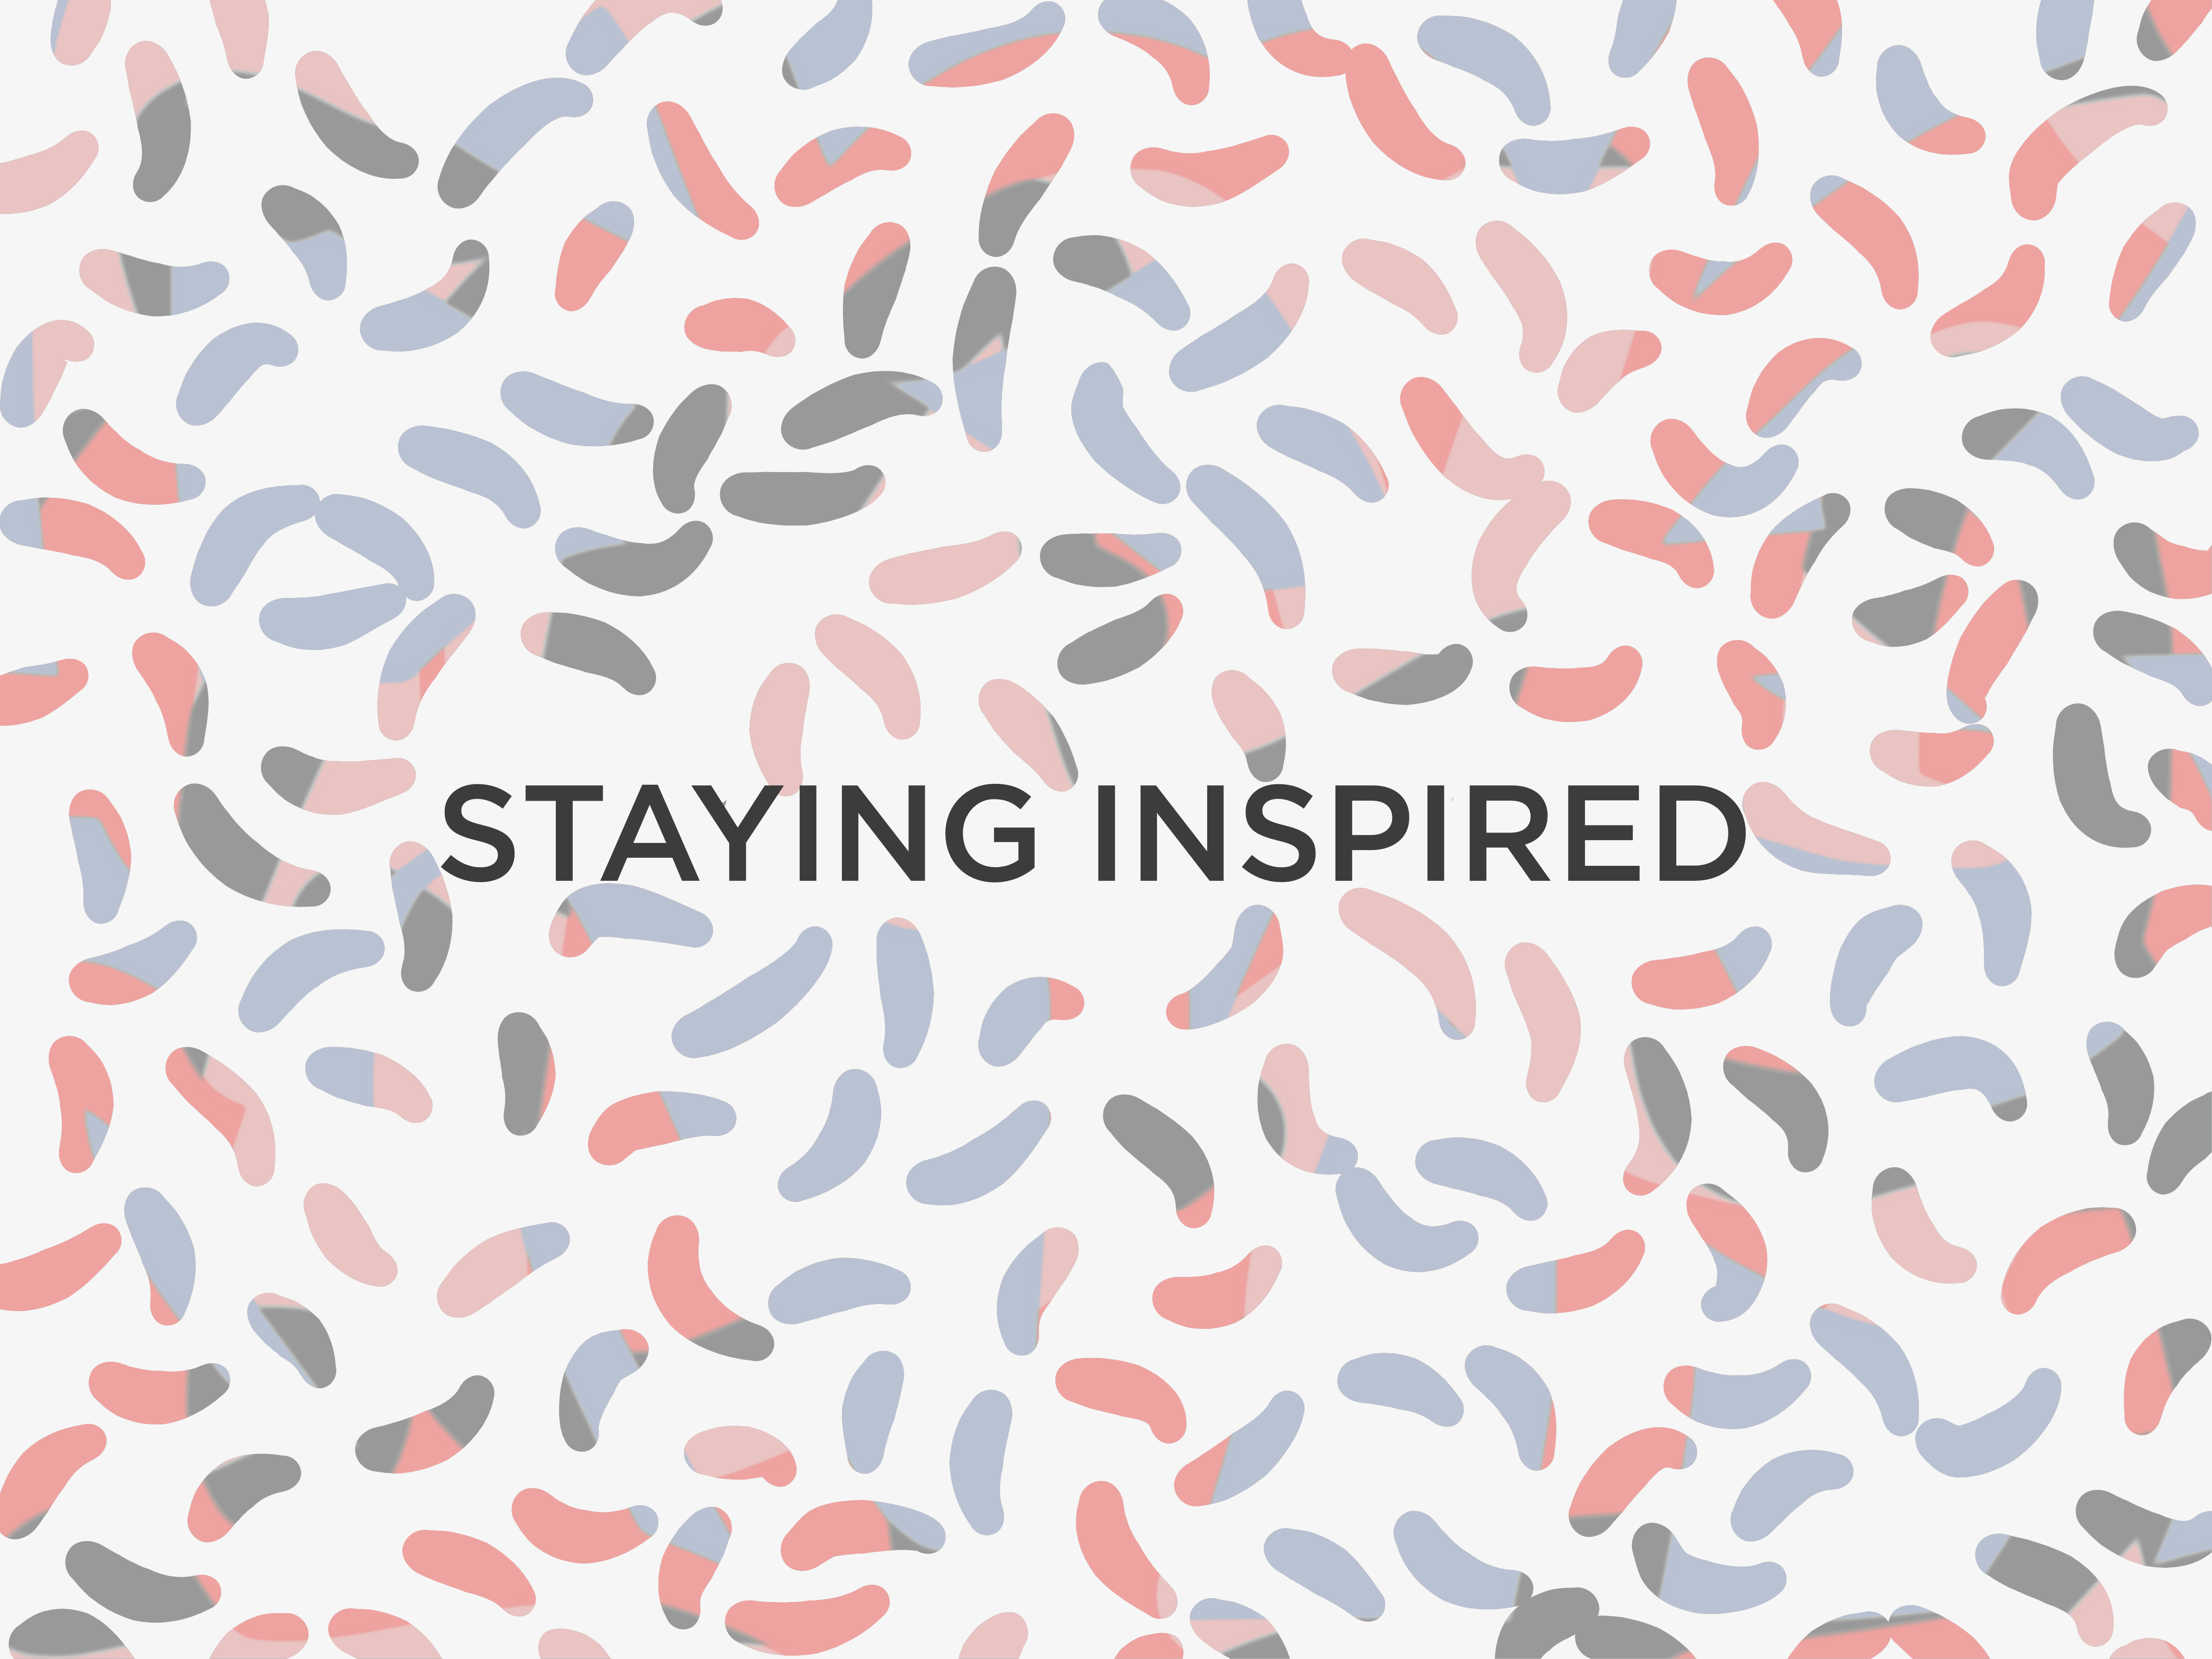 how to stay inspired pattern